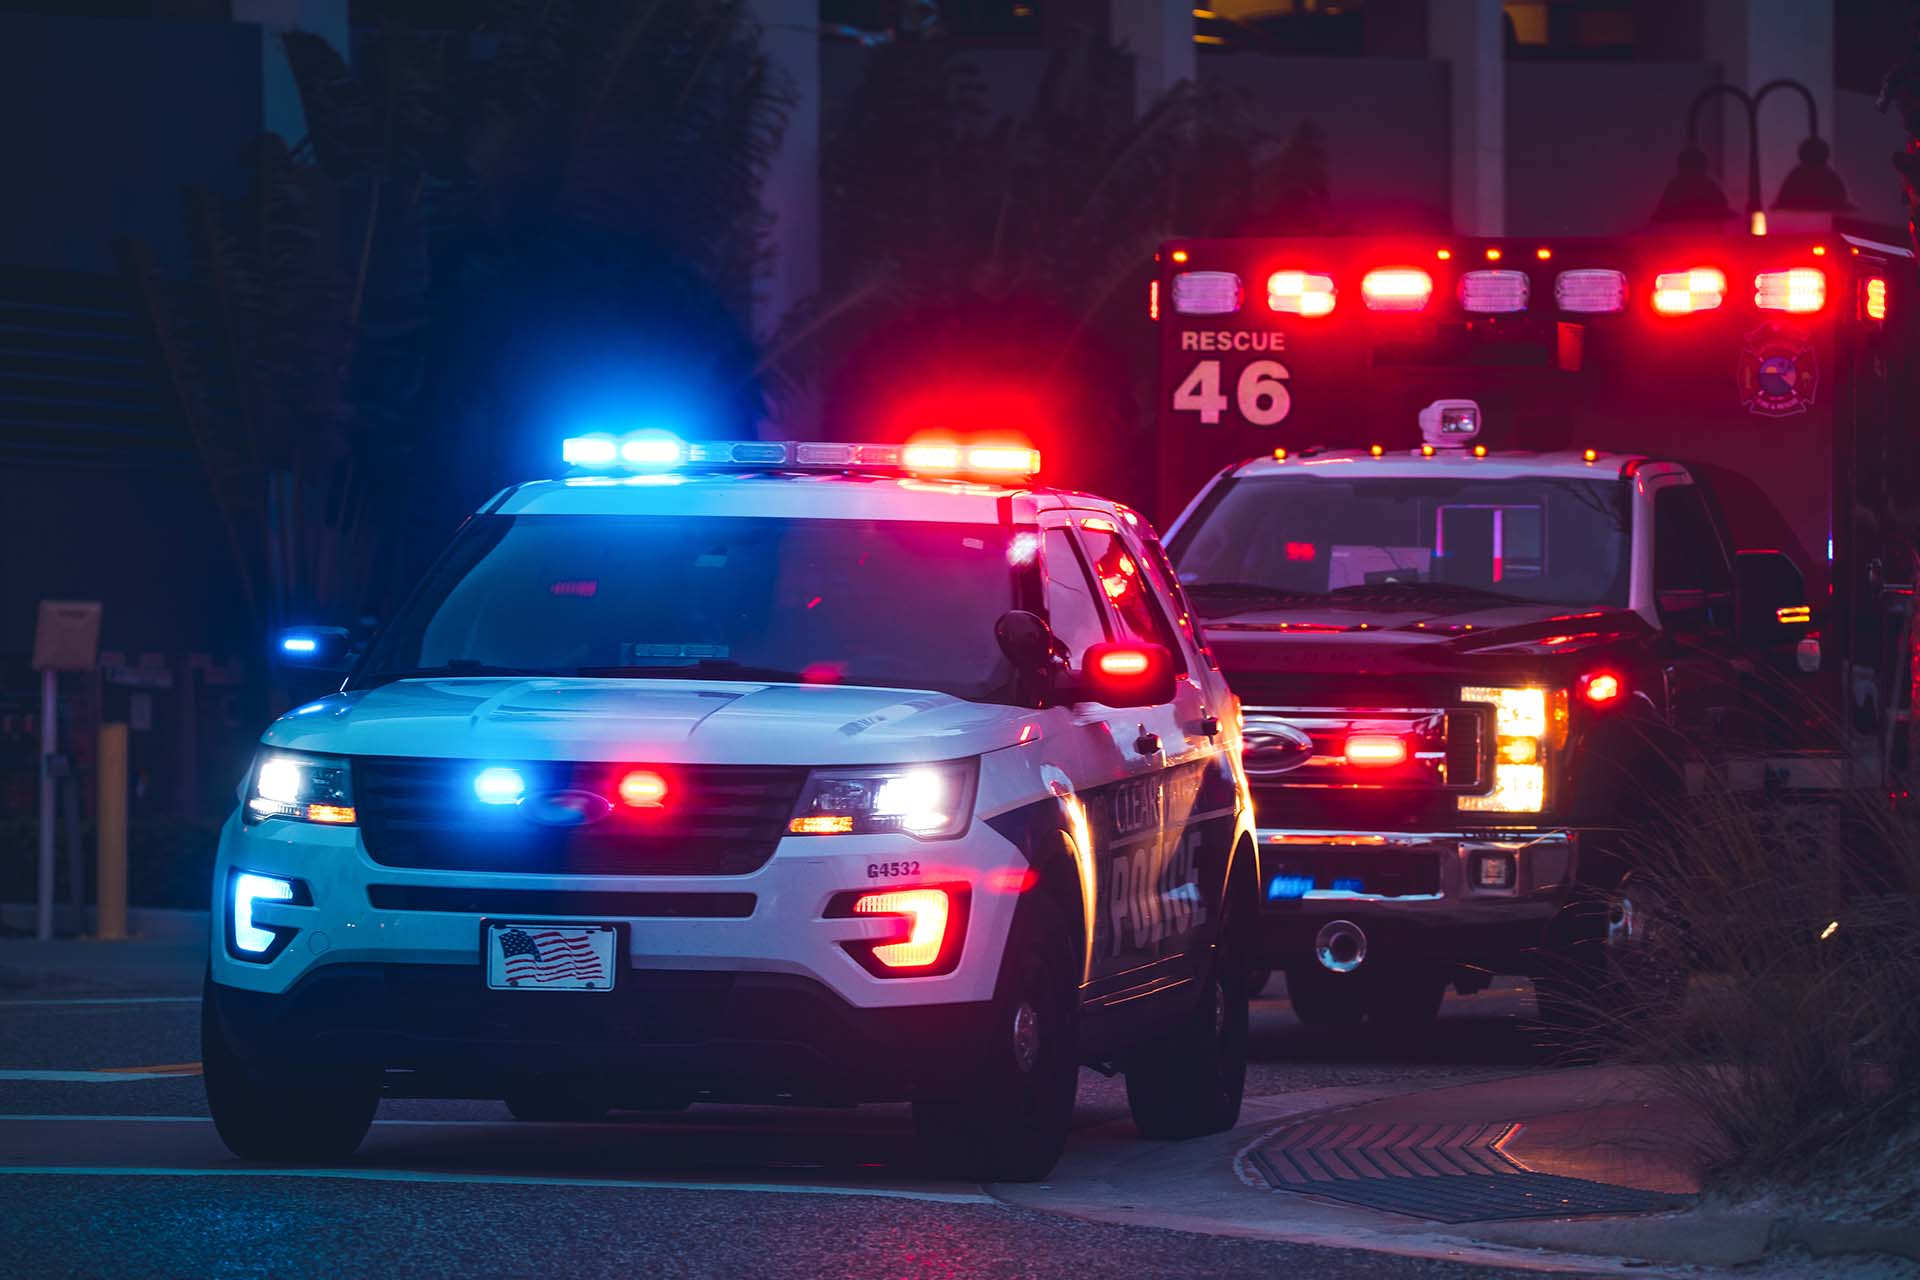 Emergency vehicles at the center of critical communications